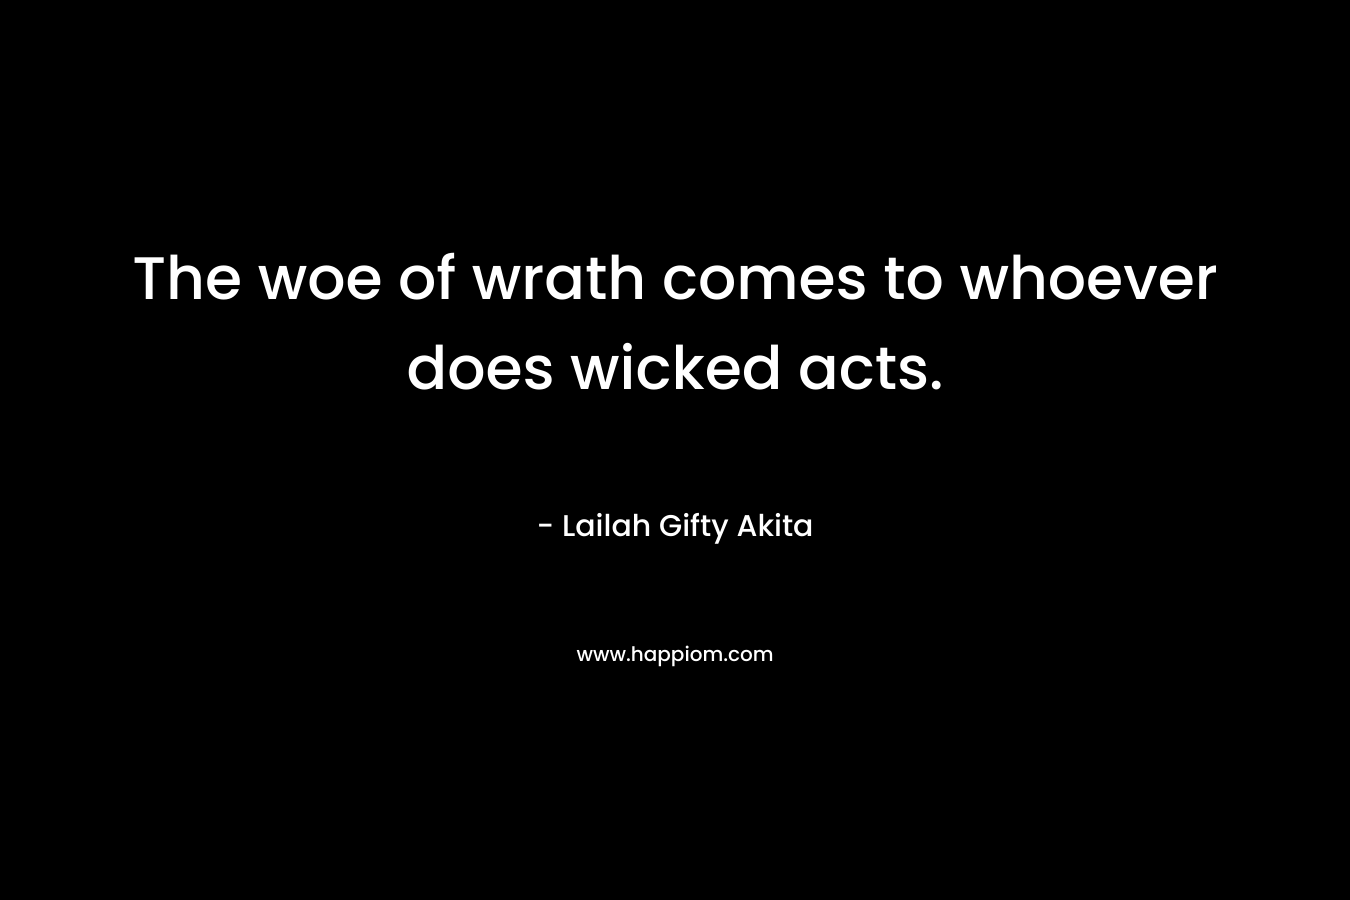 The woe of wrath comes to whoever does wicked acts.